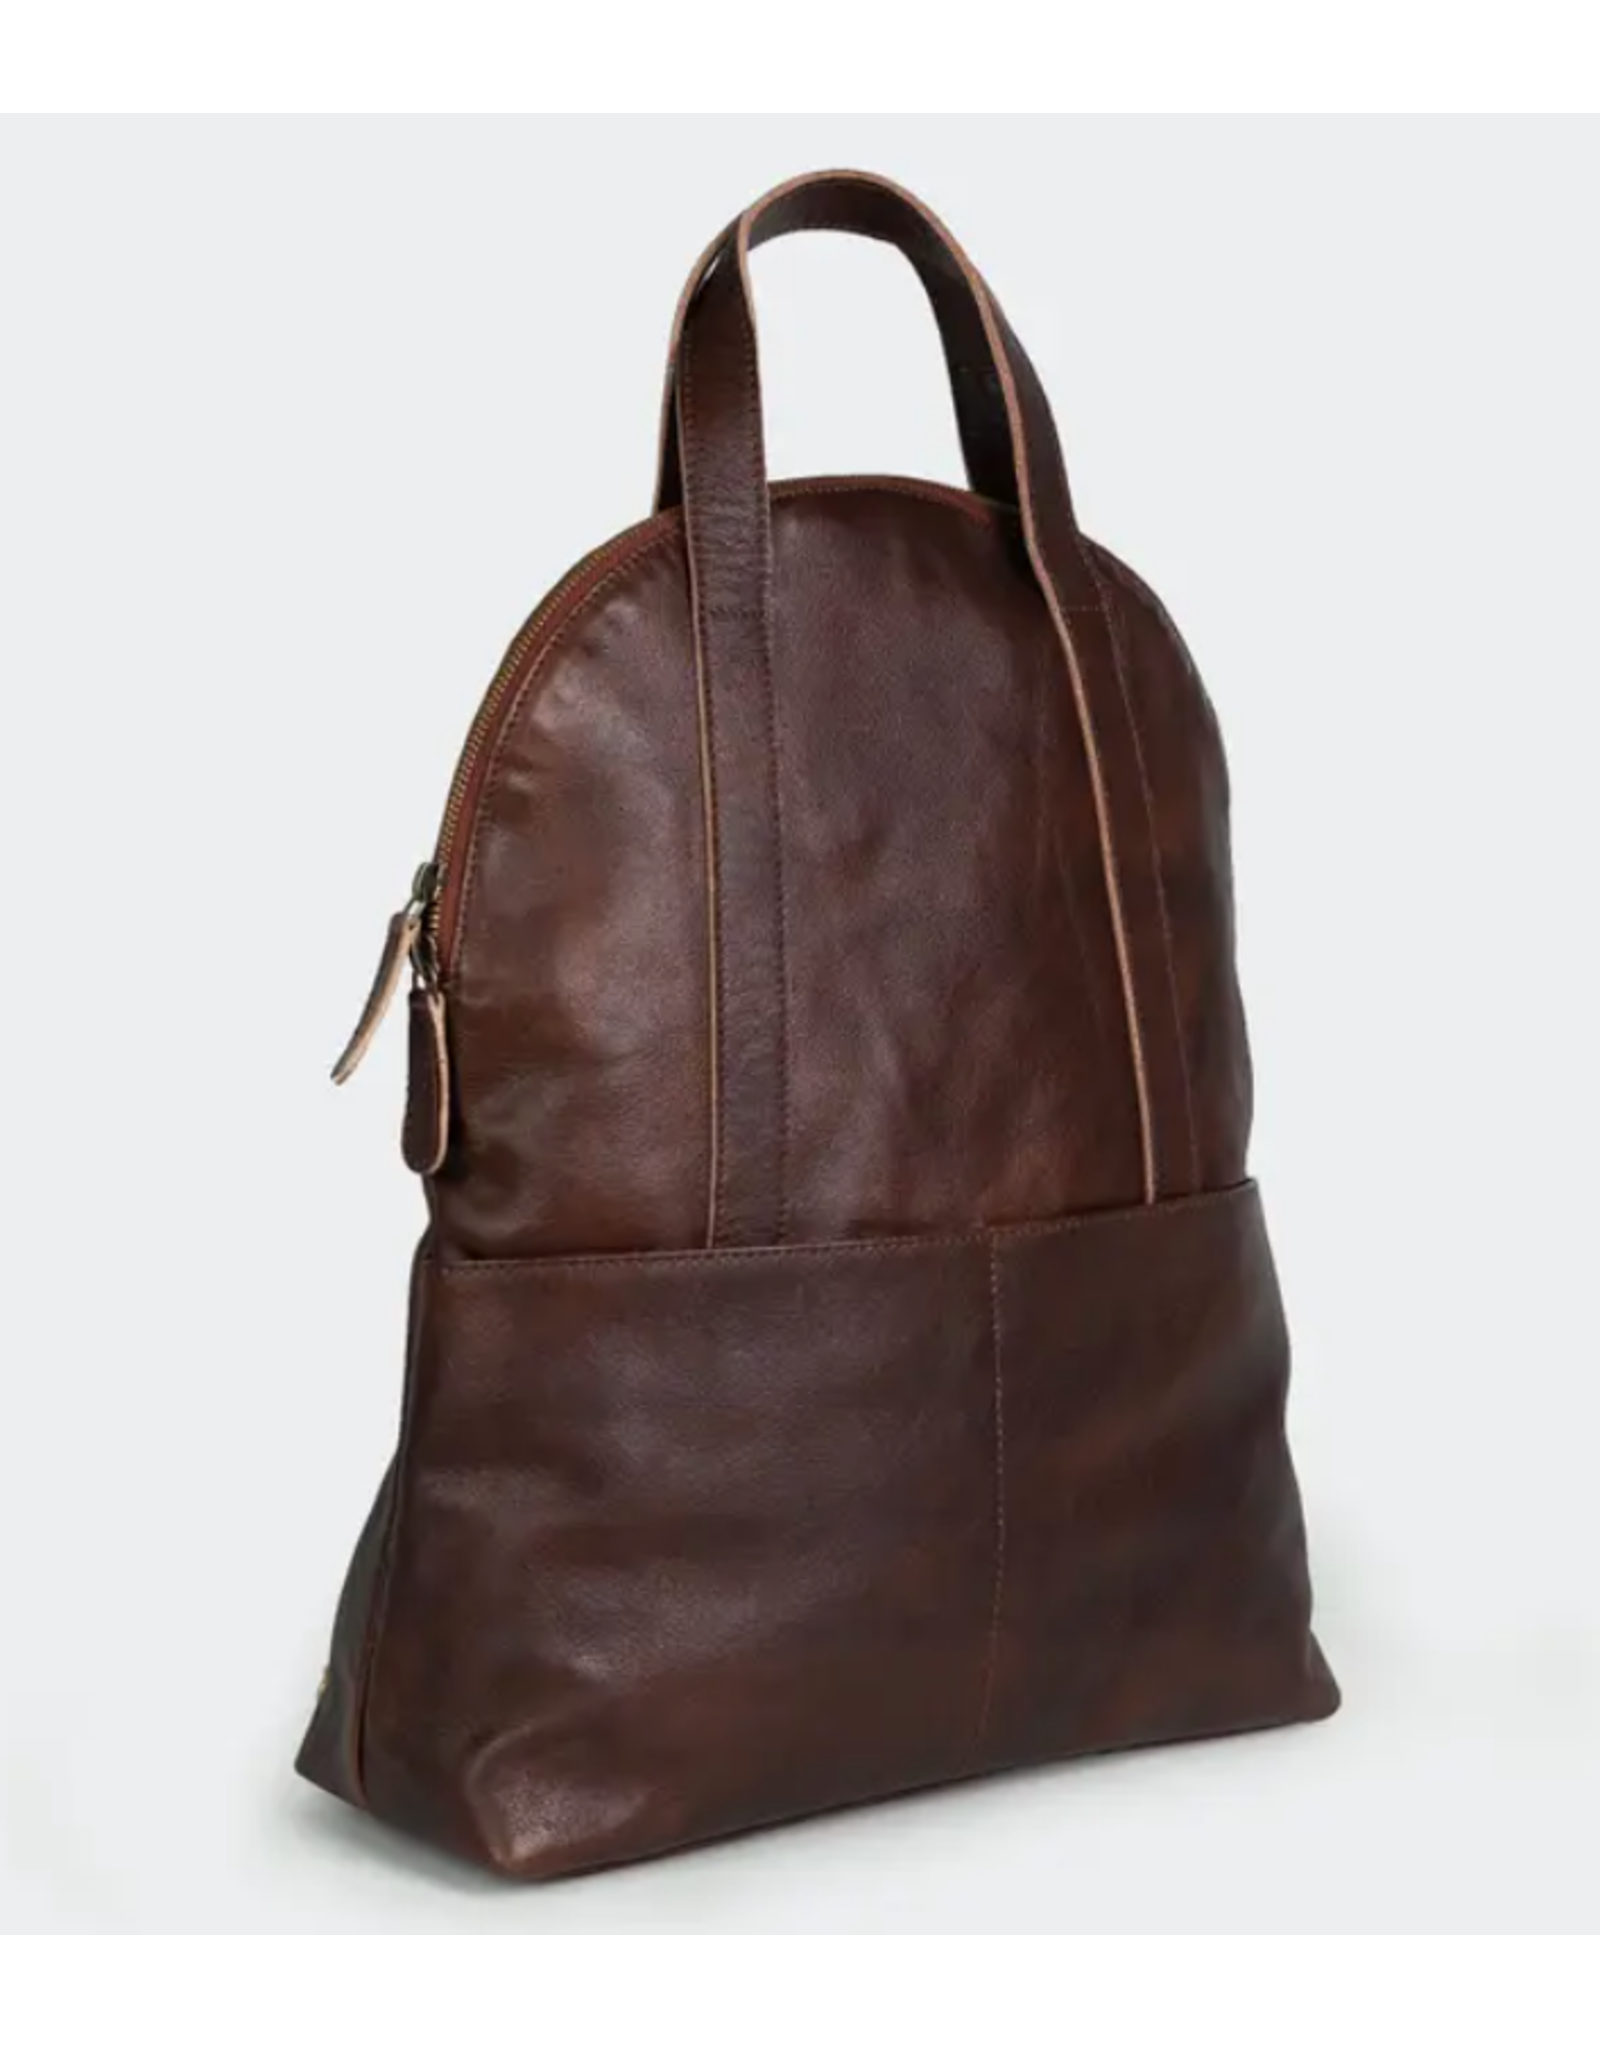 India Halfmoon Backpack in Brown Leather, India